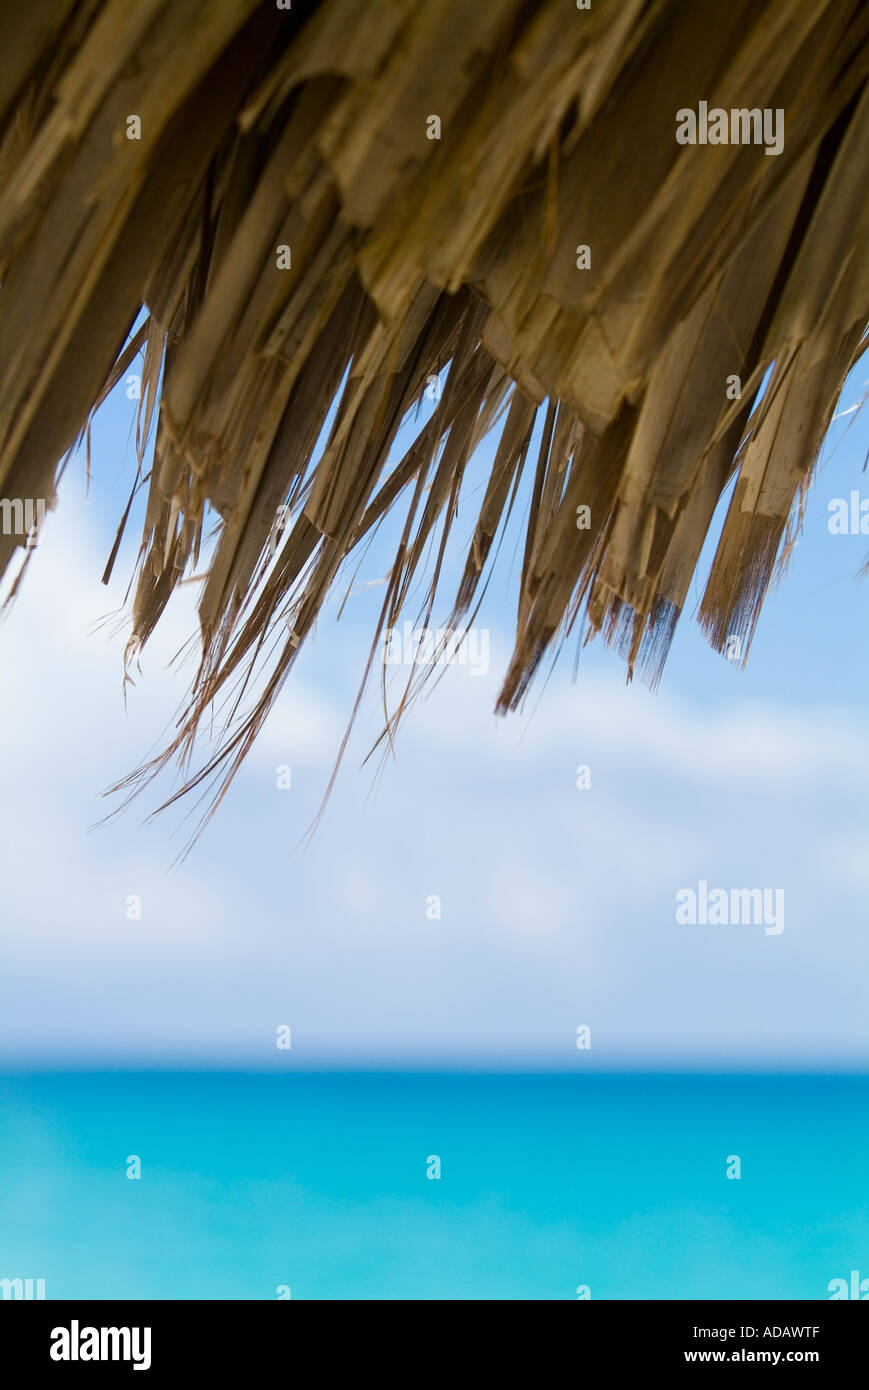 Edge of a straw / palm sun umbrella with tropical blue sea ocean waters in the background Stock Photo